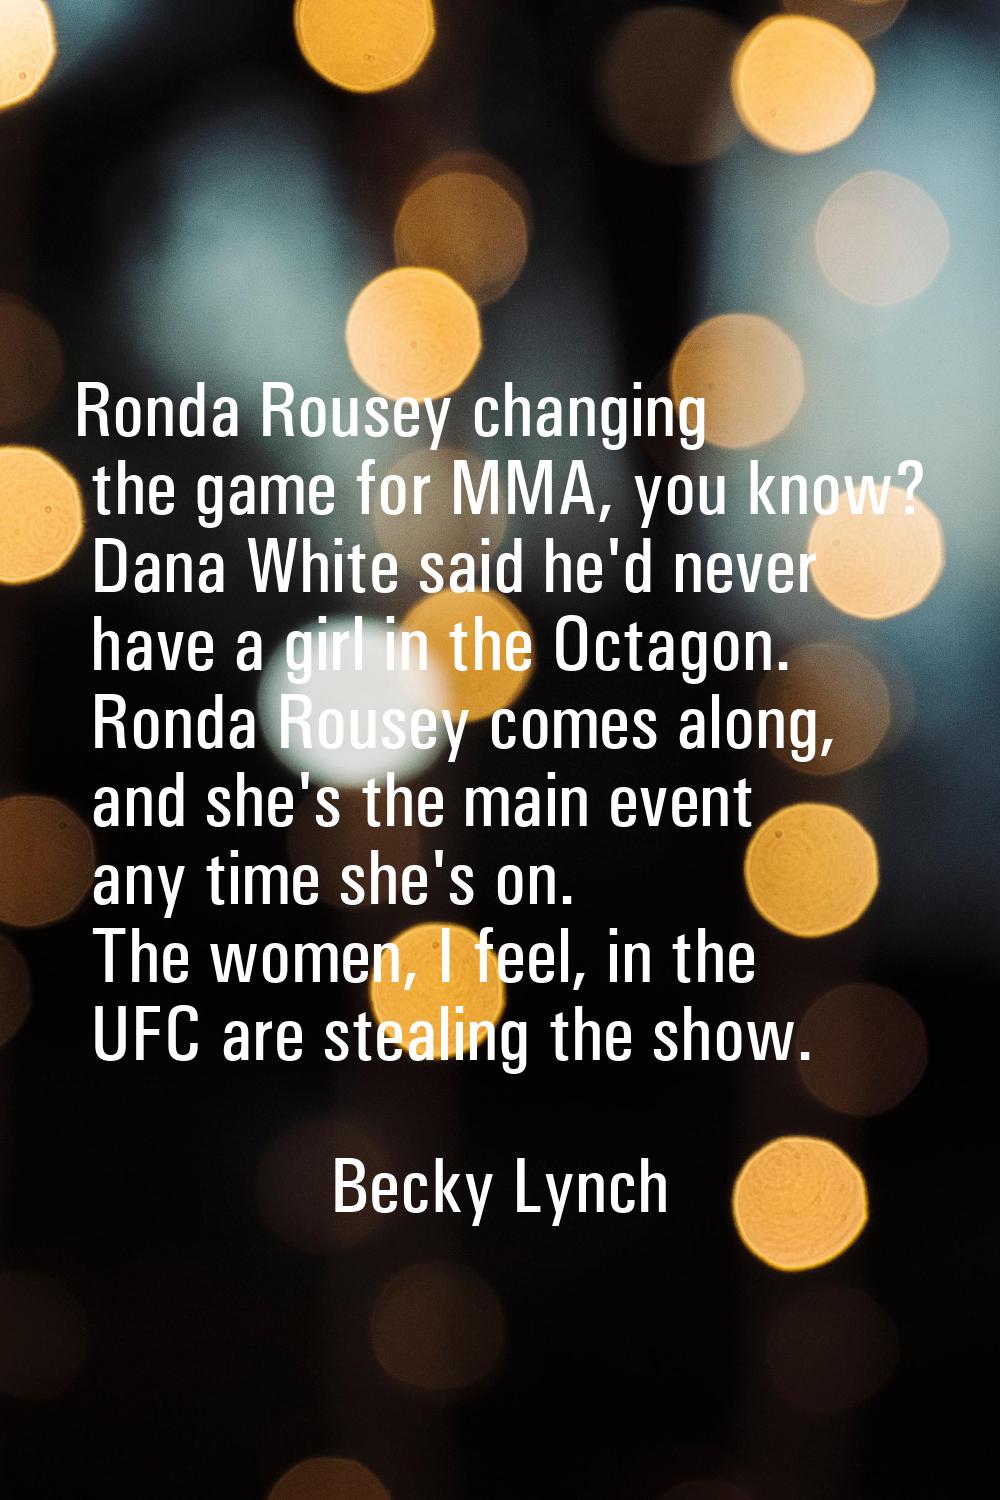 Ronda Rousey changing the game for MMA, you know? Dana White said he'd never have a girl in the Oct